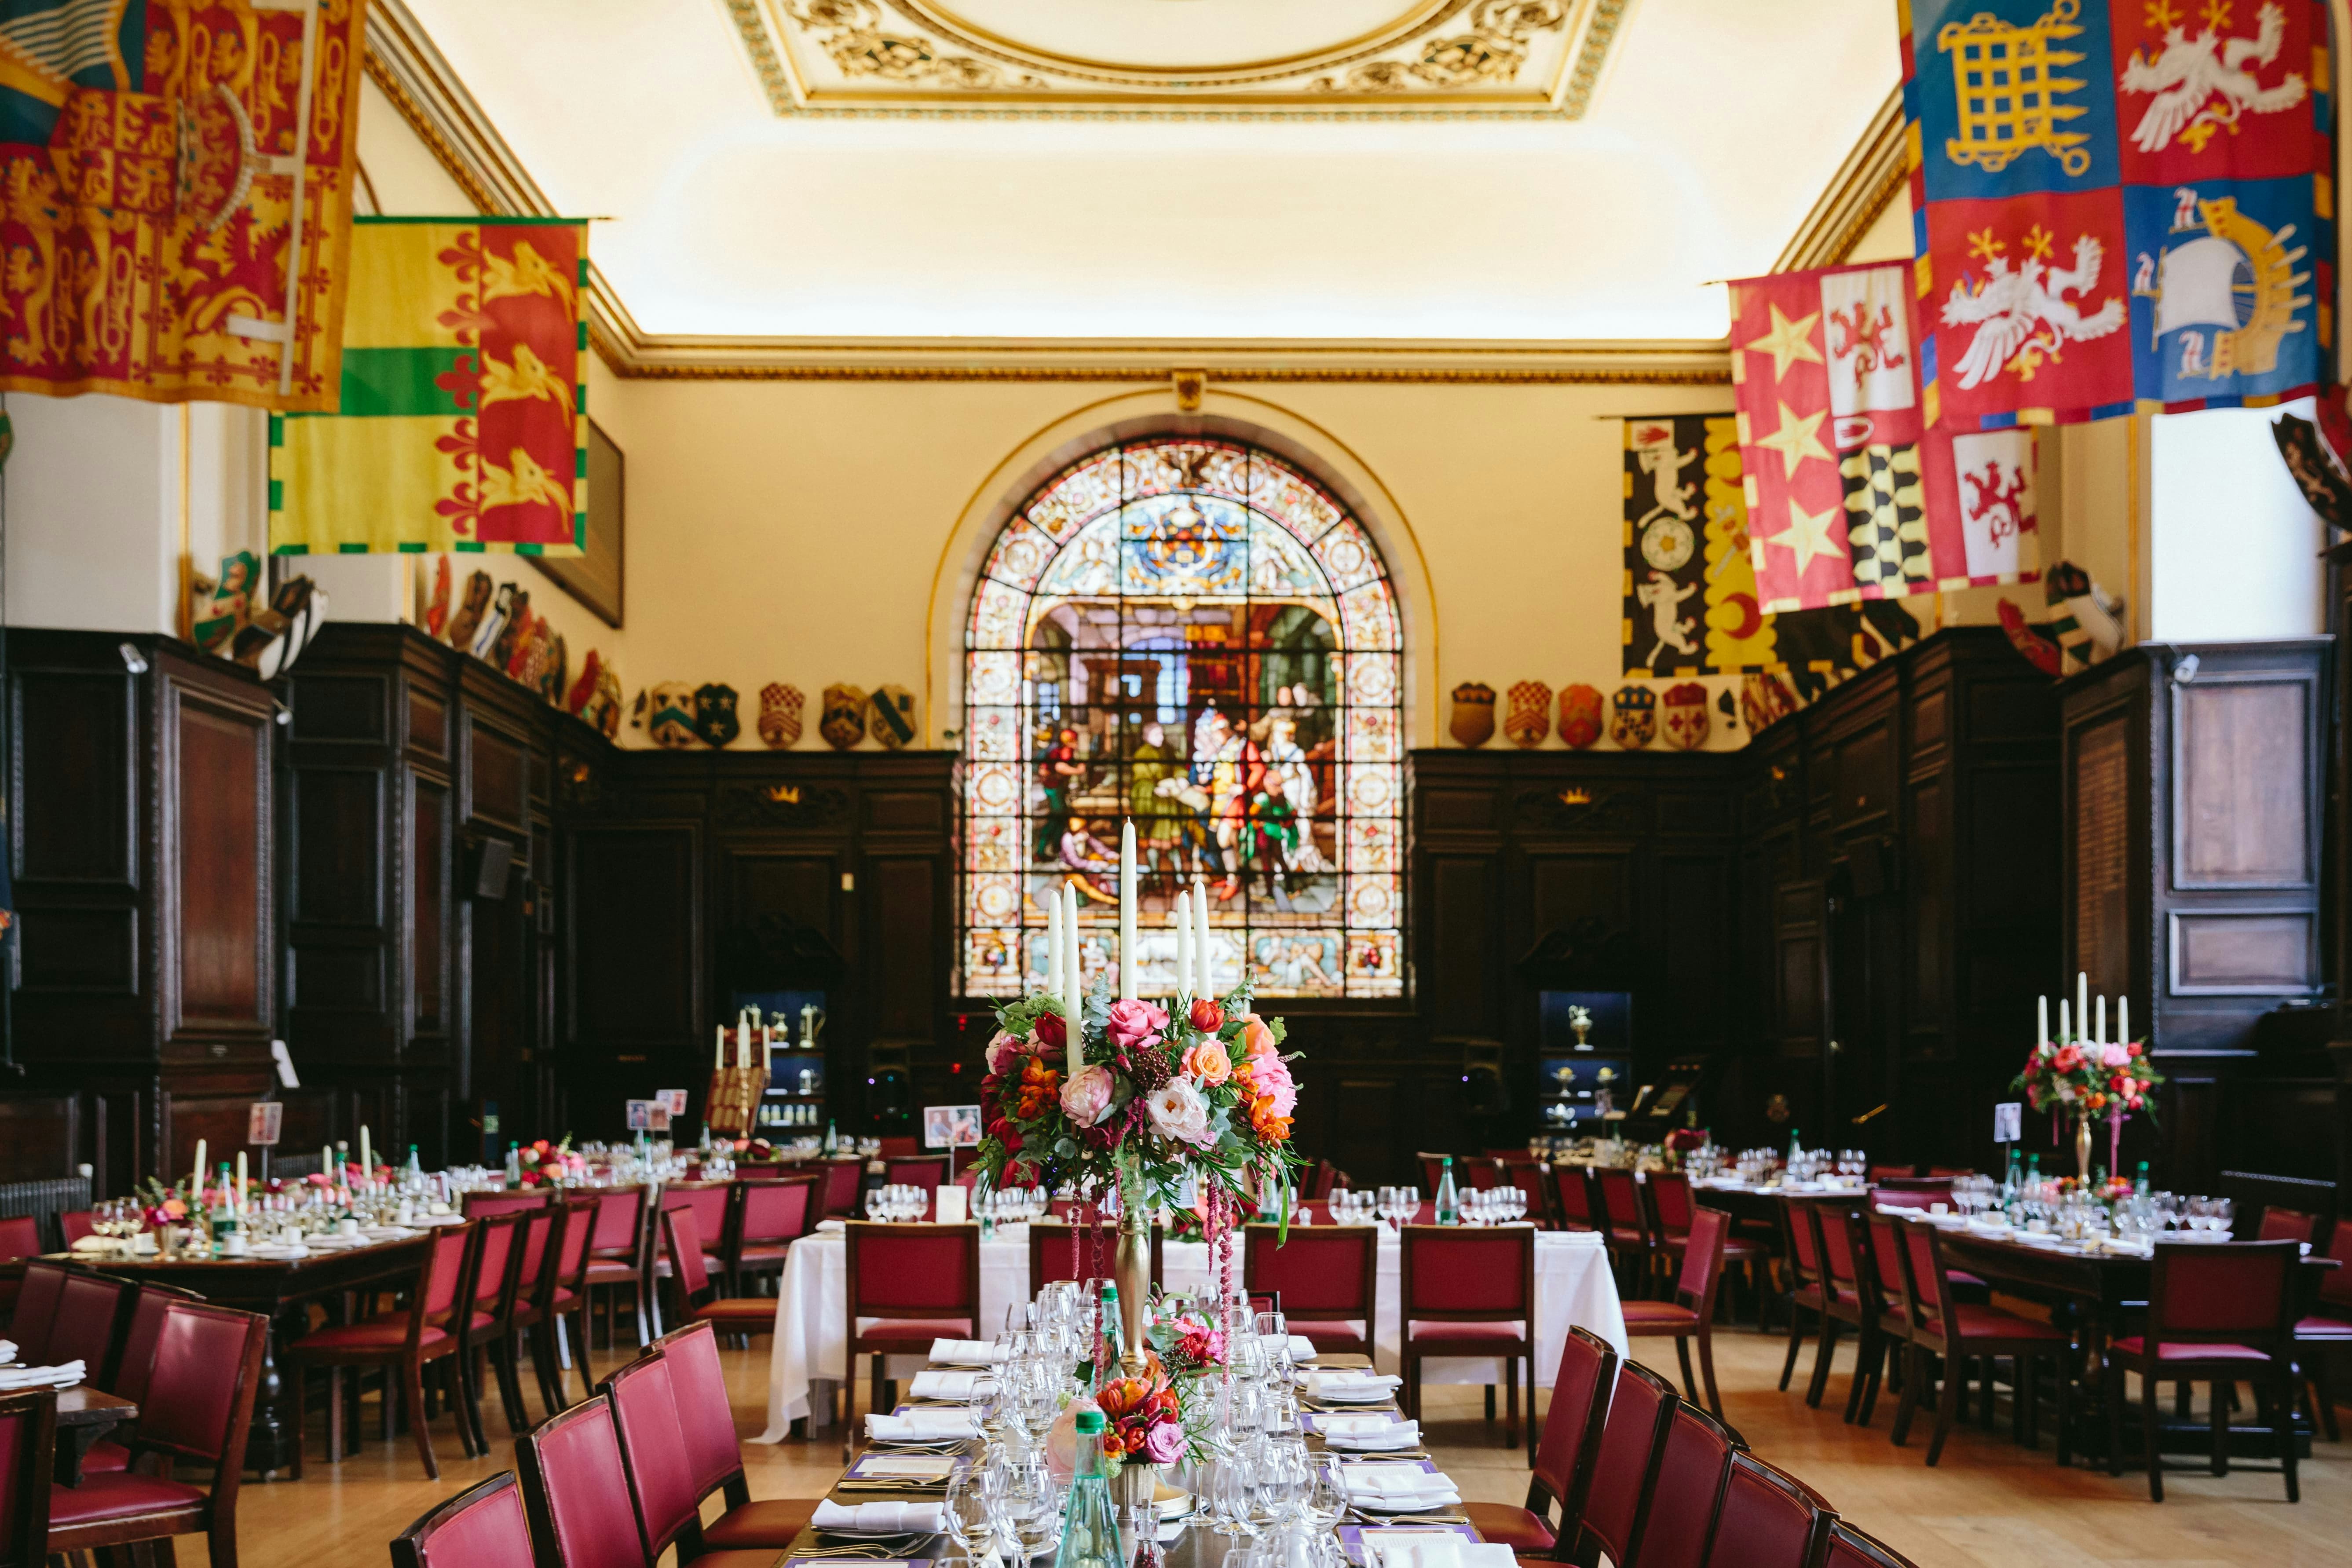 Stationers' Hall and Garden - Weddings image 4